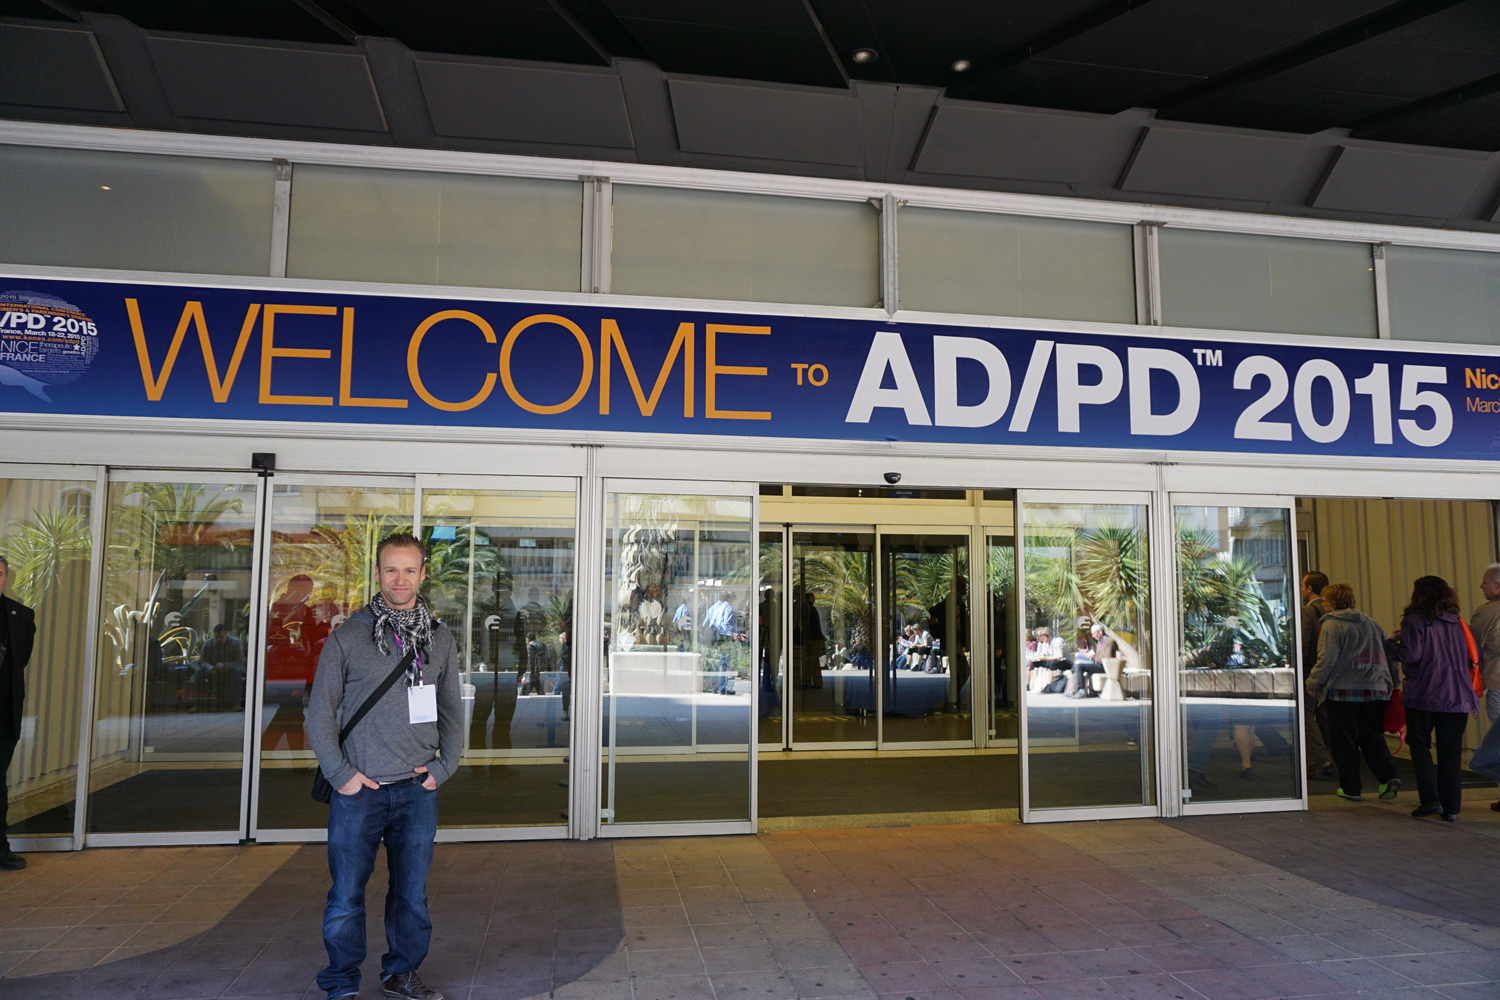 AD/PD Conference, Mar 2015